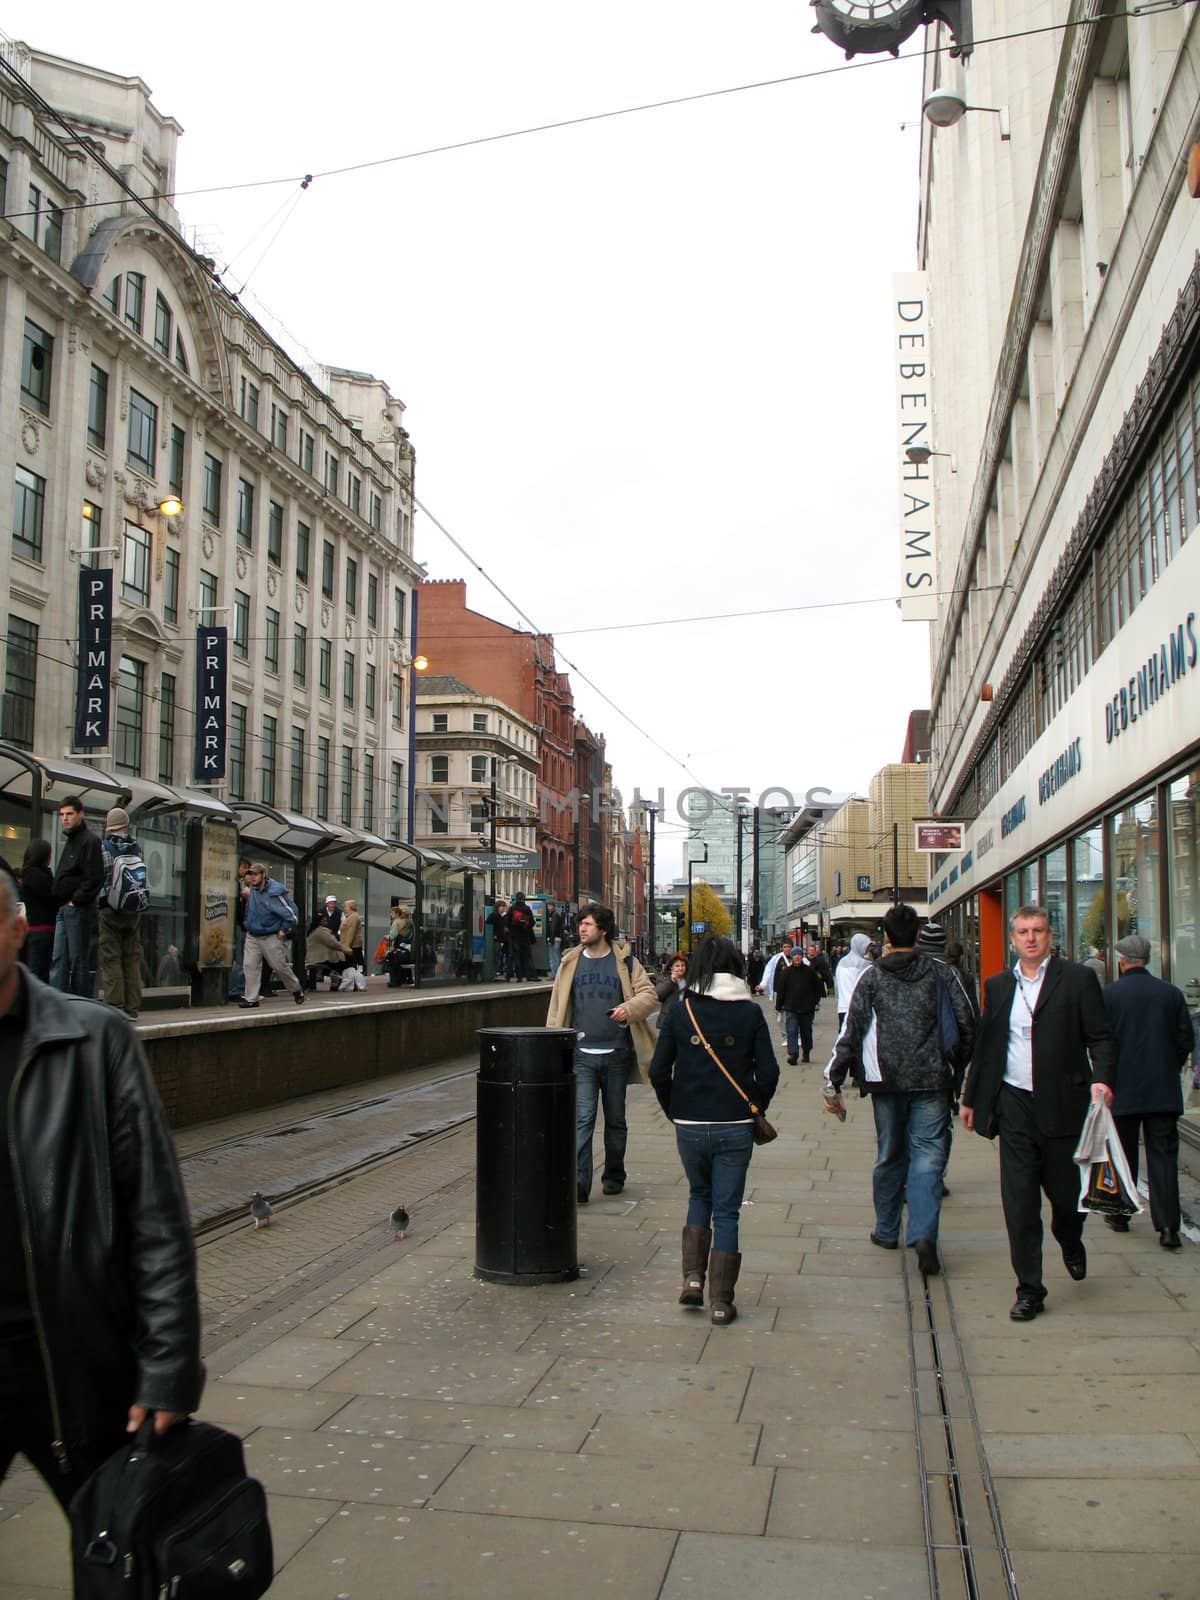 Shoppers in Manchester England by green308